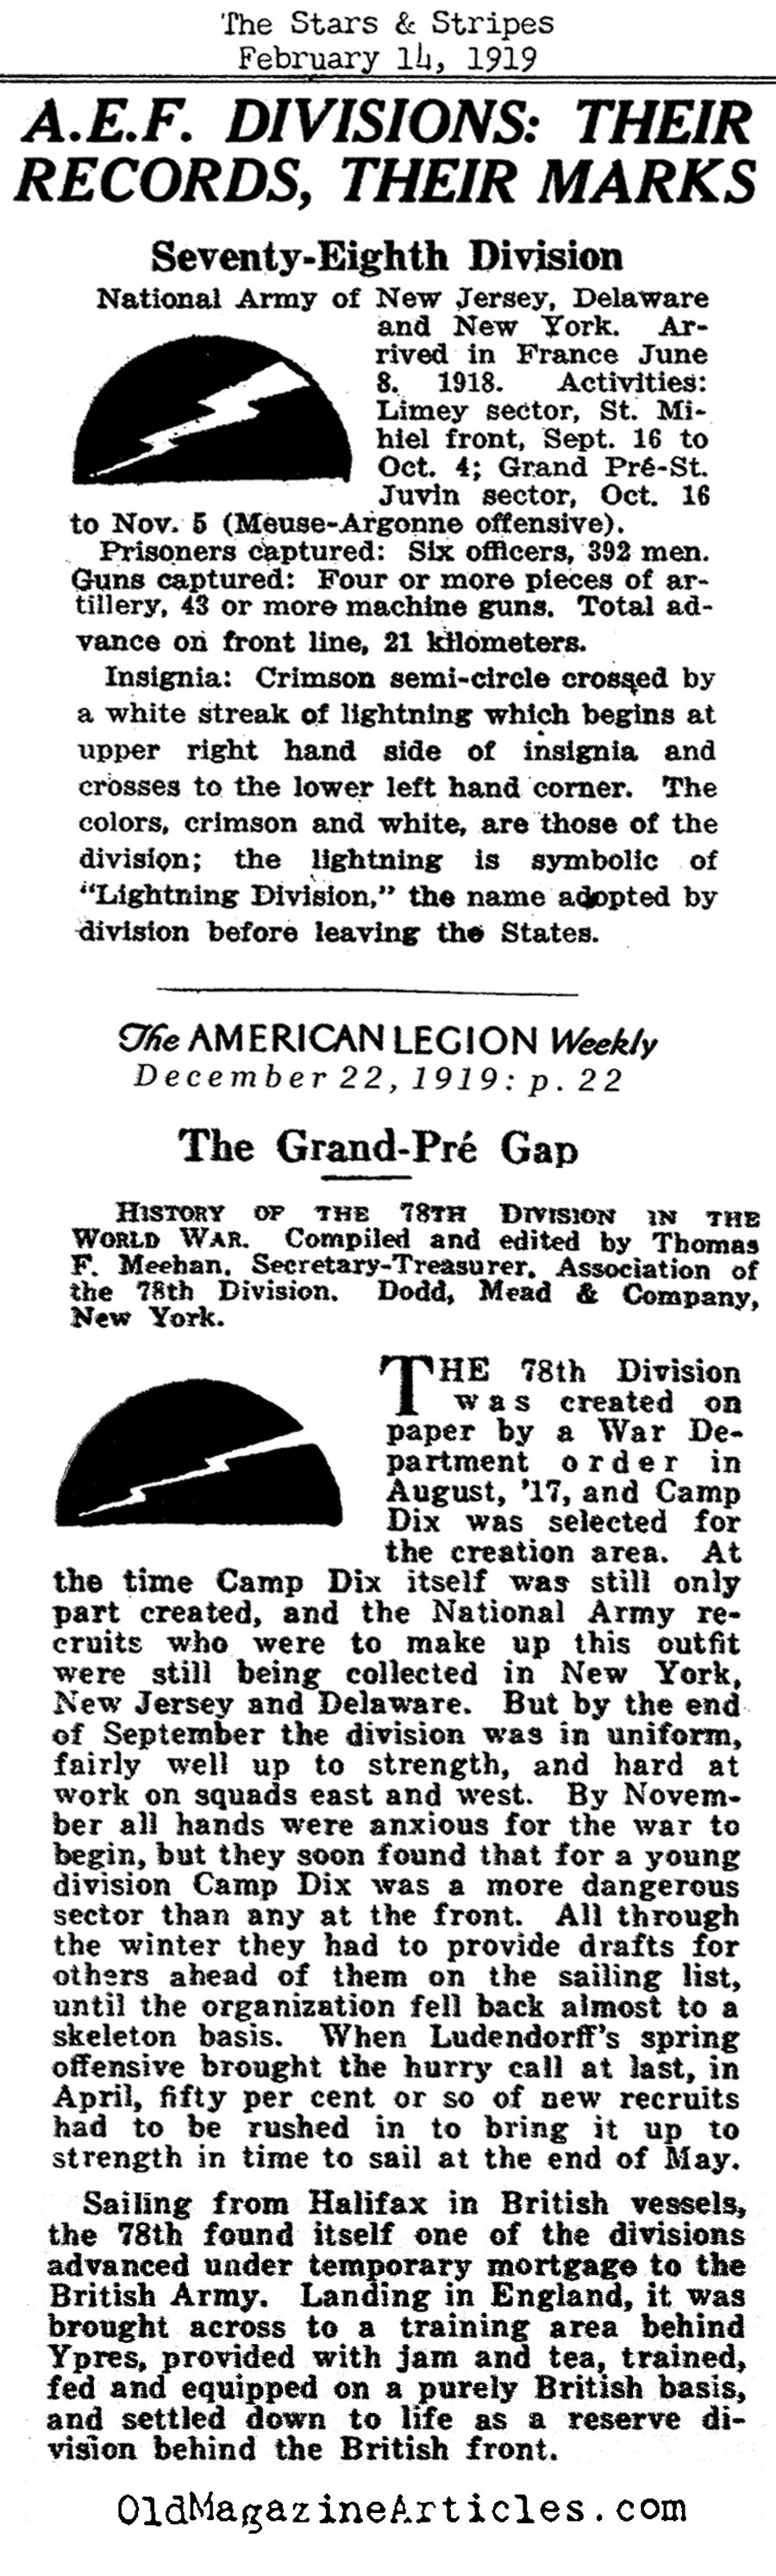 The Seventy-Eighth Division (Stars and Stripes, 1919)